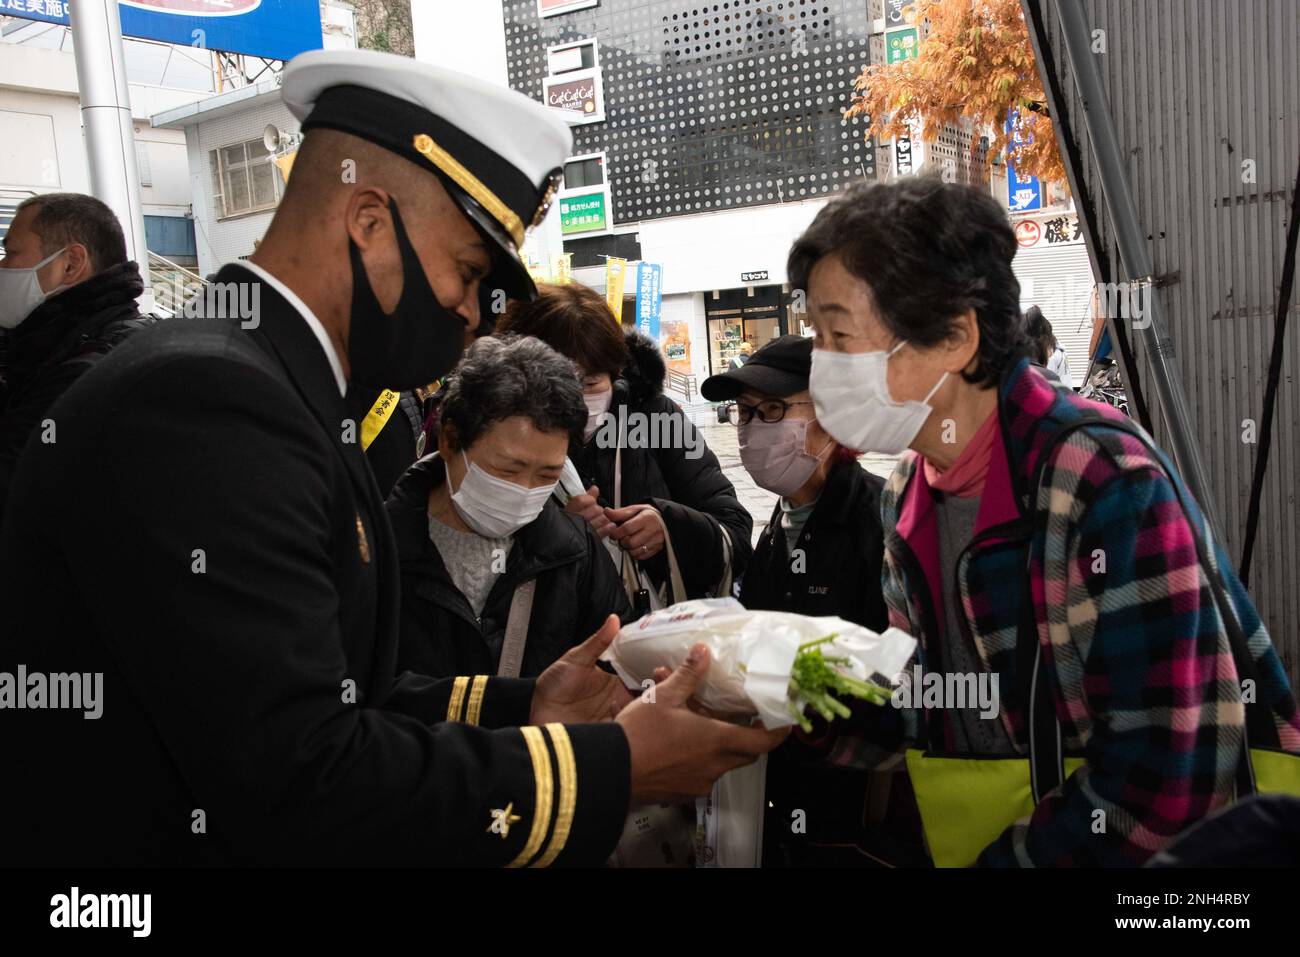 YOKOSUKA, Japan (Dec. 13, 2022) — Lt. Alexander Bates, security officer at Commander, Fleet Activities Yokosuka (CFAY) hands out a Japanese daikon radish to a pedestrian at Yokosuka Chuo Station during an event raising awareness of drunk driving during the holiday season. “Daikon” is a play on words as it is close to the Japanese word “daikonzetsu”, meaning eradication (of drunk driving). For more than 75 years, CFAY has provided, maintained, and operated base facilities and services in support of the U.S. 7th Fleet’s forward deployed naval forces, tenant commands, and thousands of military an Stock Photo